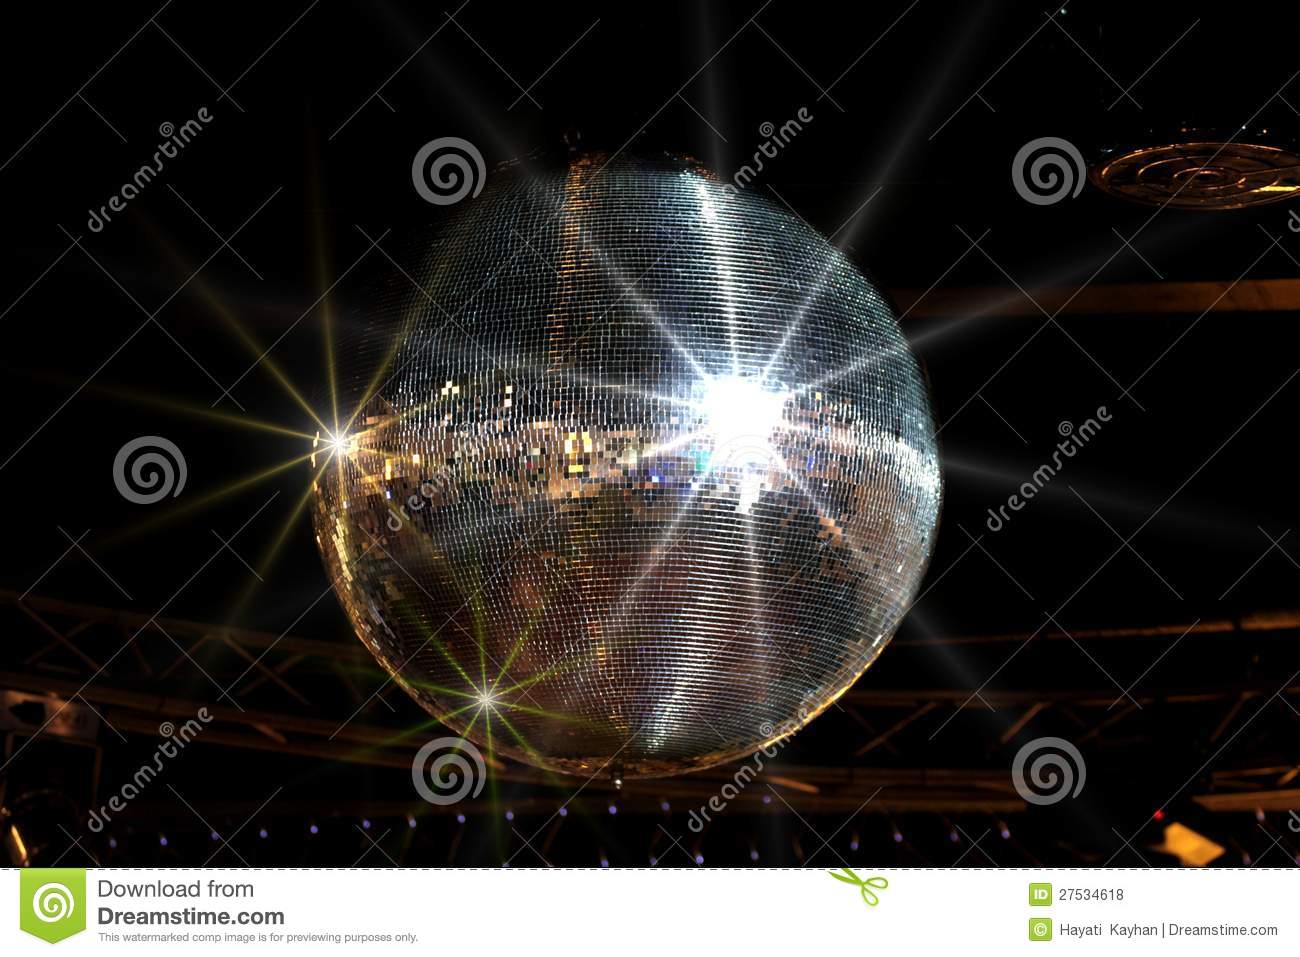 httpwww-dreamstime-comroyalty-free-stock-photos-shining-disco-ball-image27534618